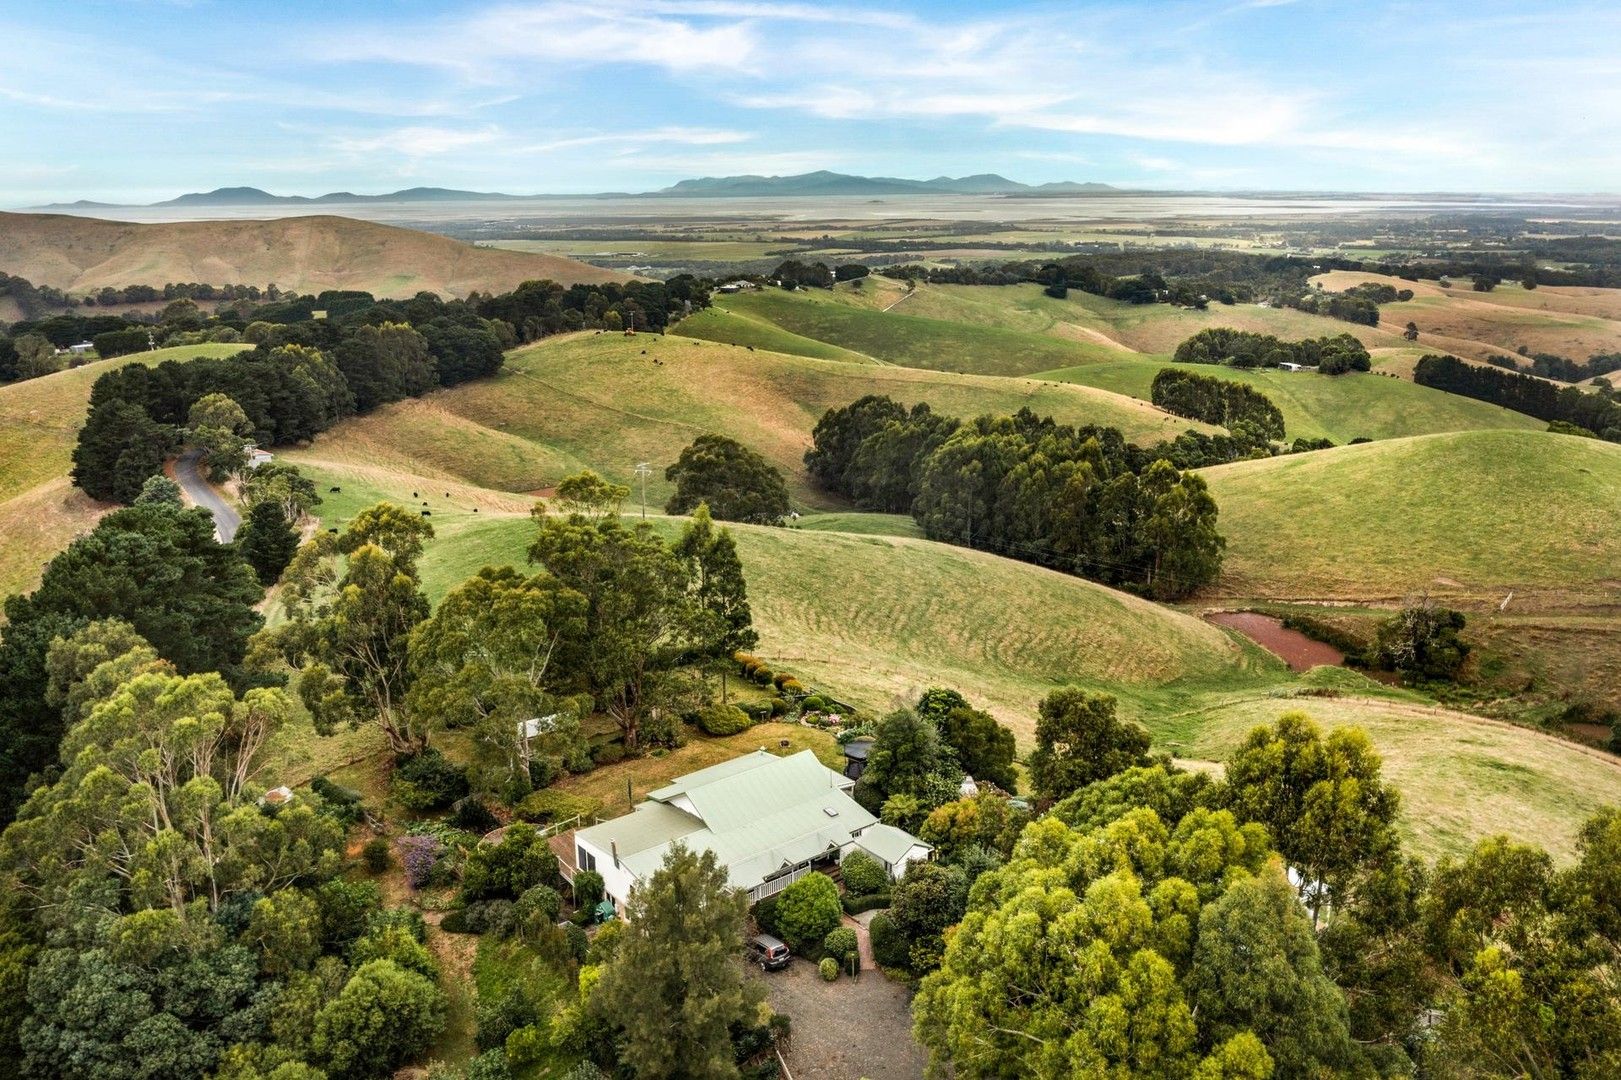 4 bedrooms Rural in 485 Ameys Track FOSTER VIC, 3960